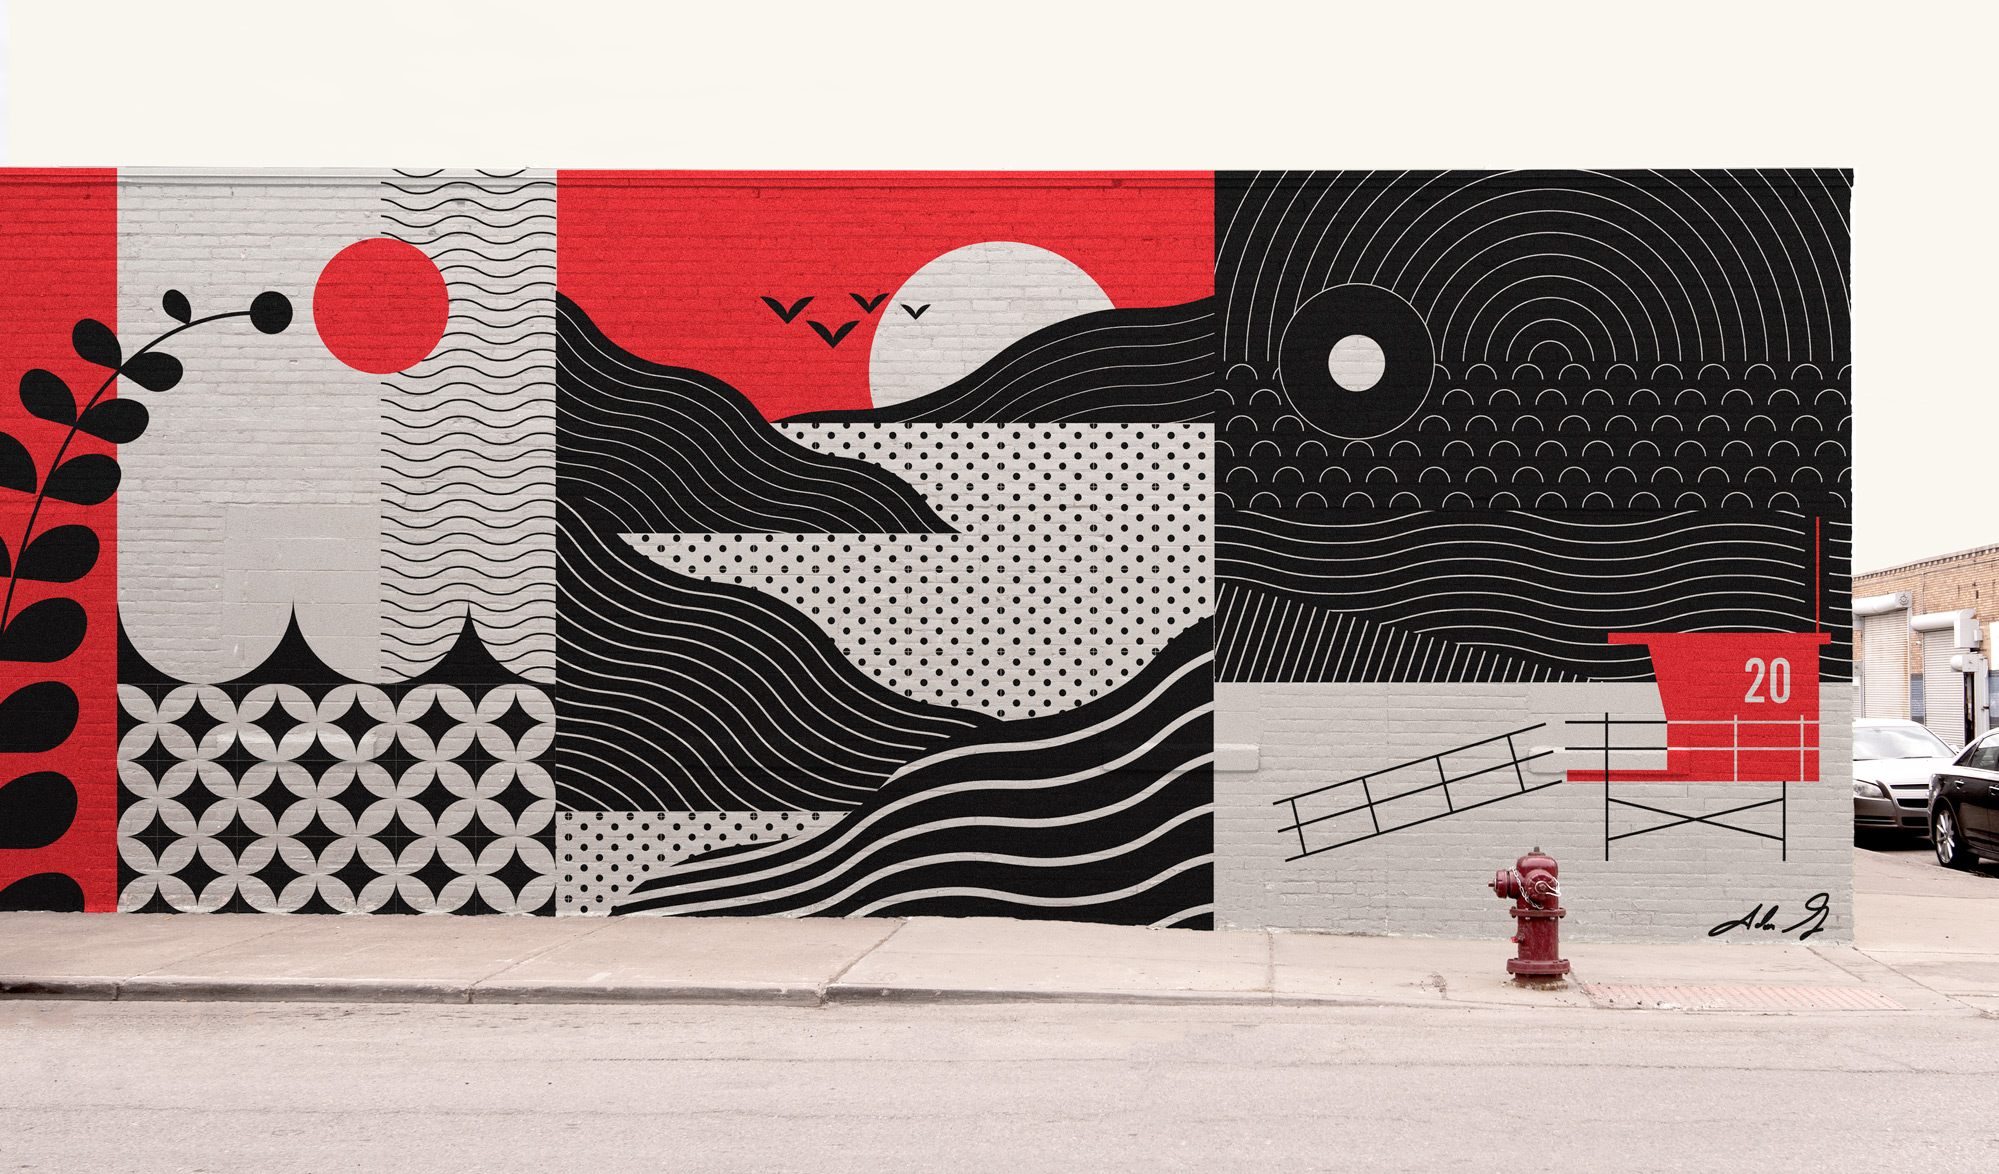 Triptych illustrations: left has flora curving over ocean and sun, center has mountains and ocean with sunset and birds, right is the beach with Tower 20 in Santa Monica with dark swirly sky on brick building